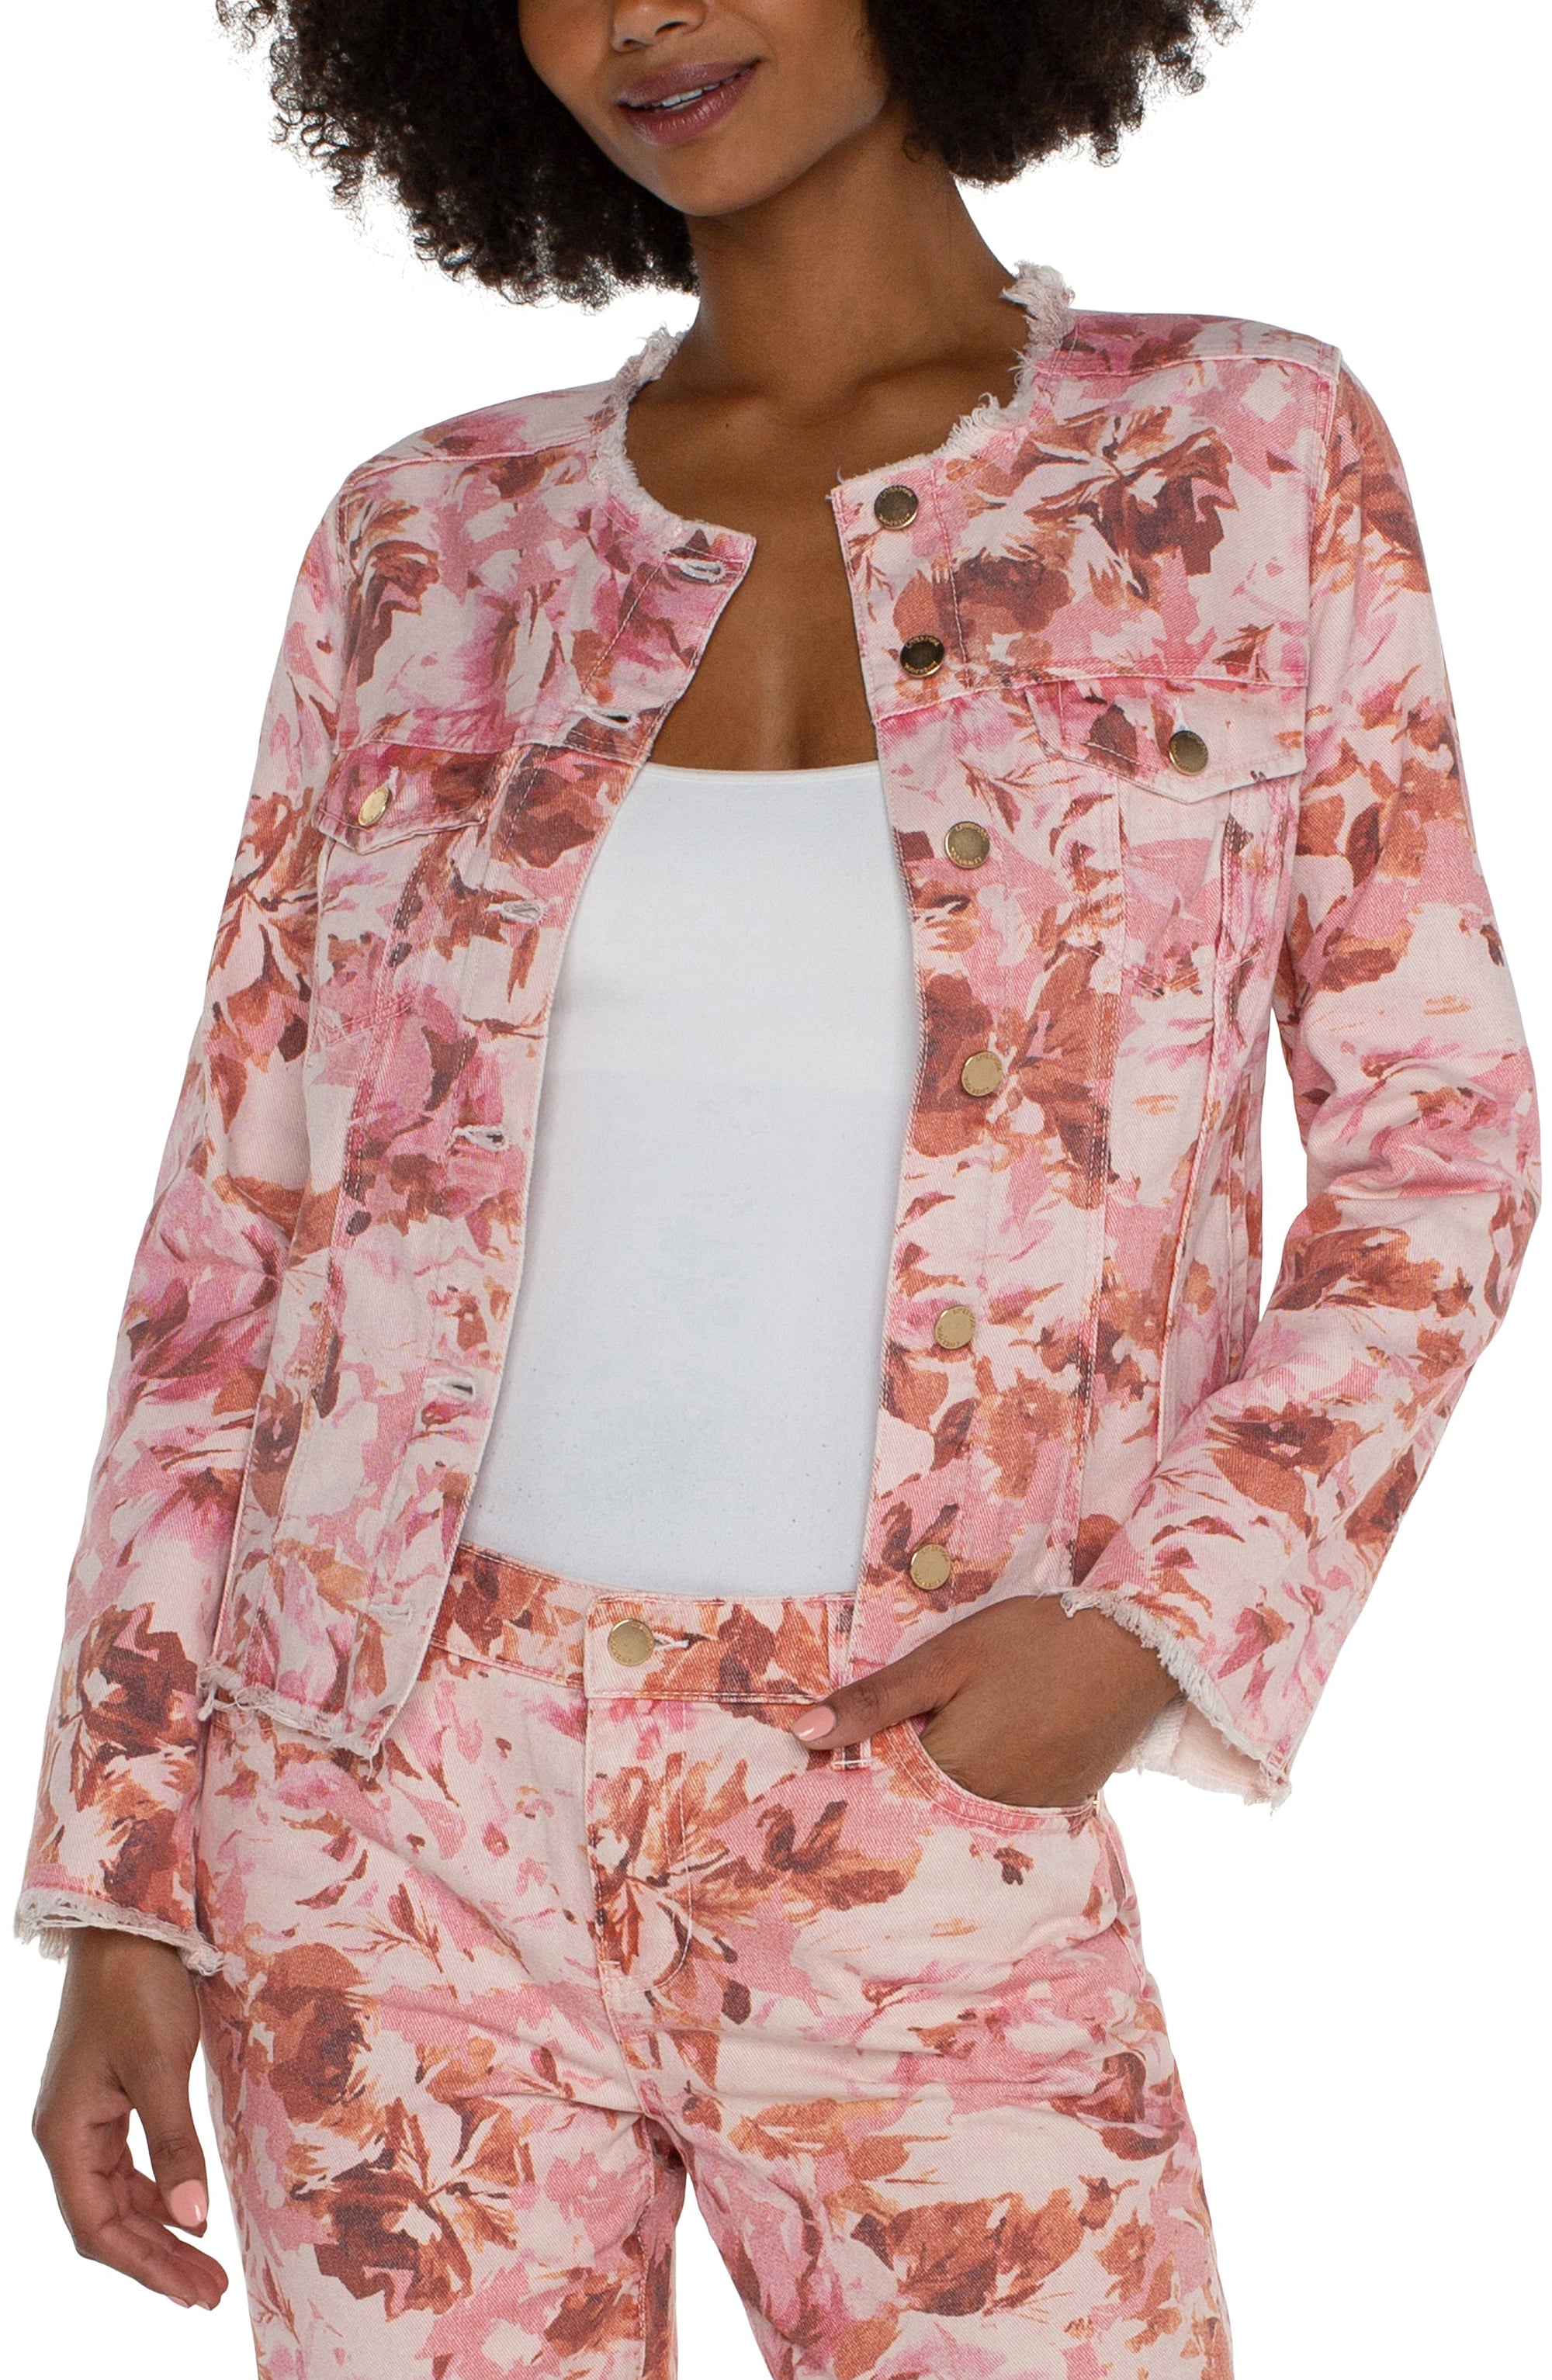 PINK FLORAL JACKET-Jackets & Sweaters-LIVERPOOL-SMALL-PINK-Coriander